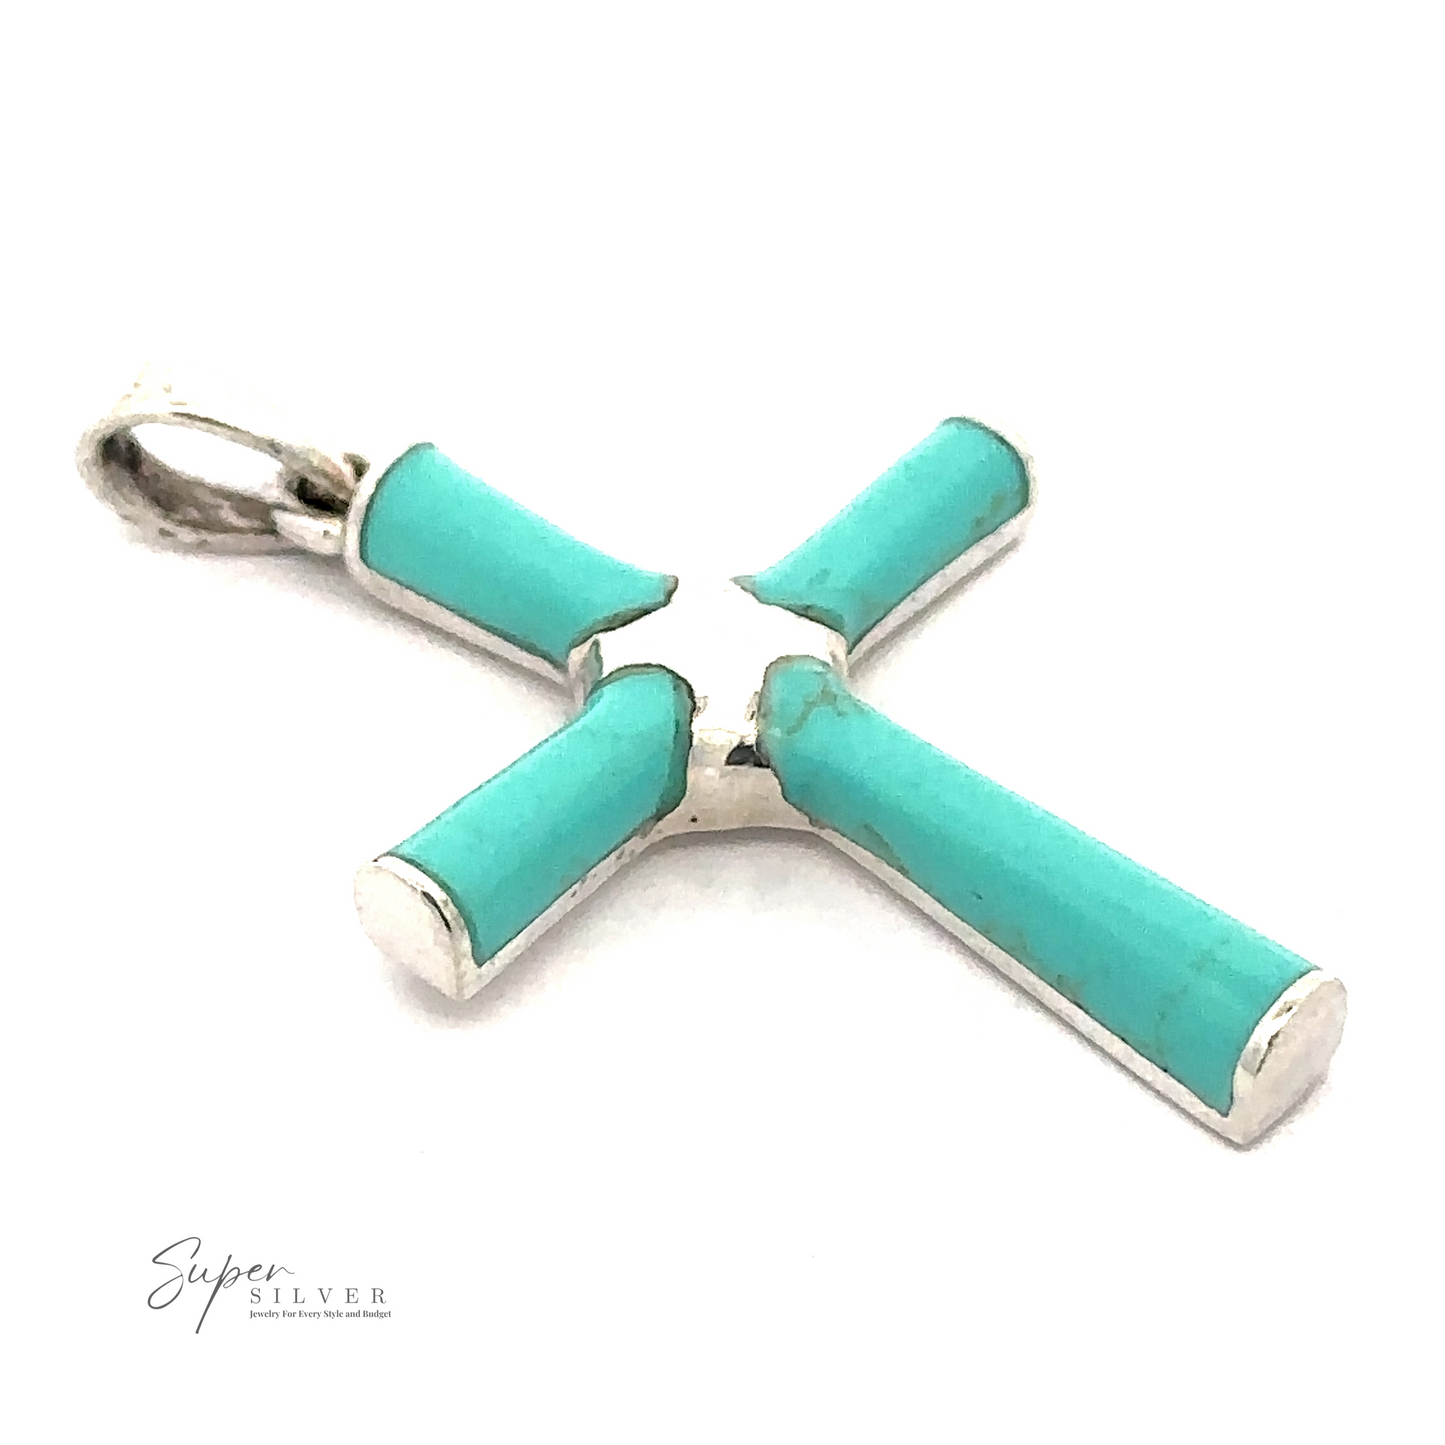 
                  
                    A Turquoise Cross Pendant with turquoise inlays and a loop at the top for a chain. Crafted from .925 Sterling Silver, the logo "Super Silver" is visible at the bottom left.
                  
                